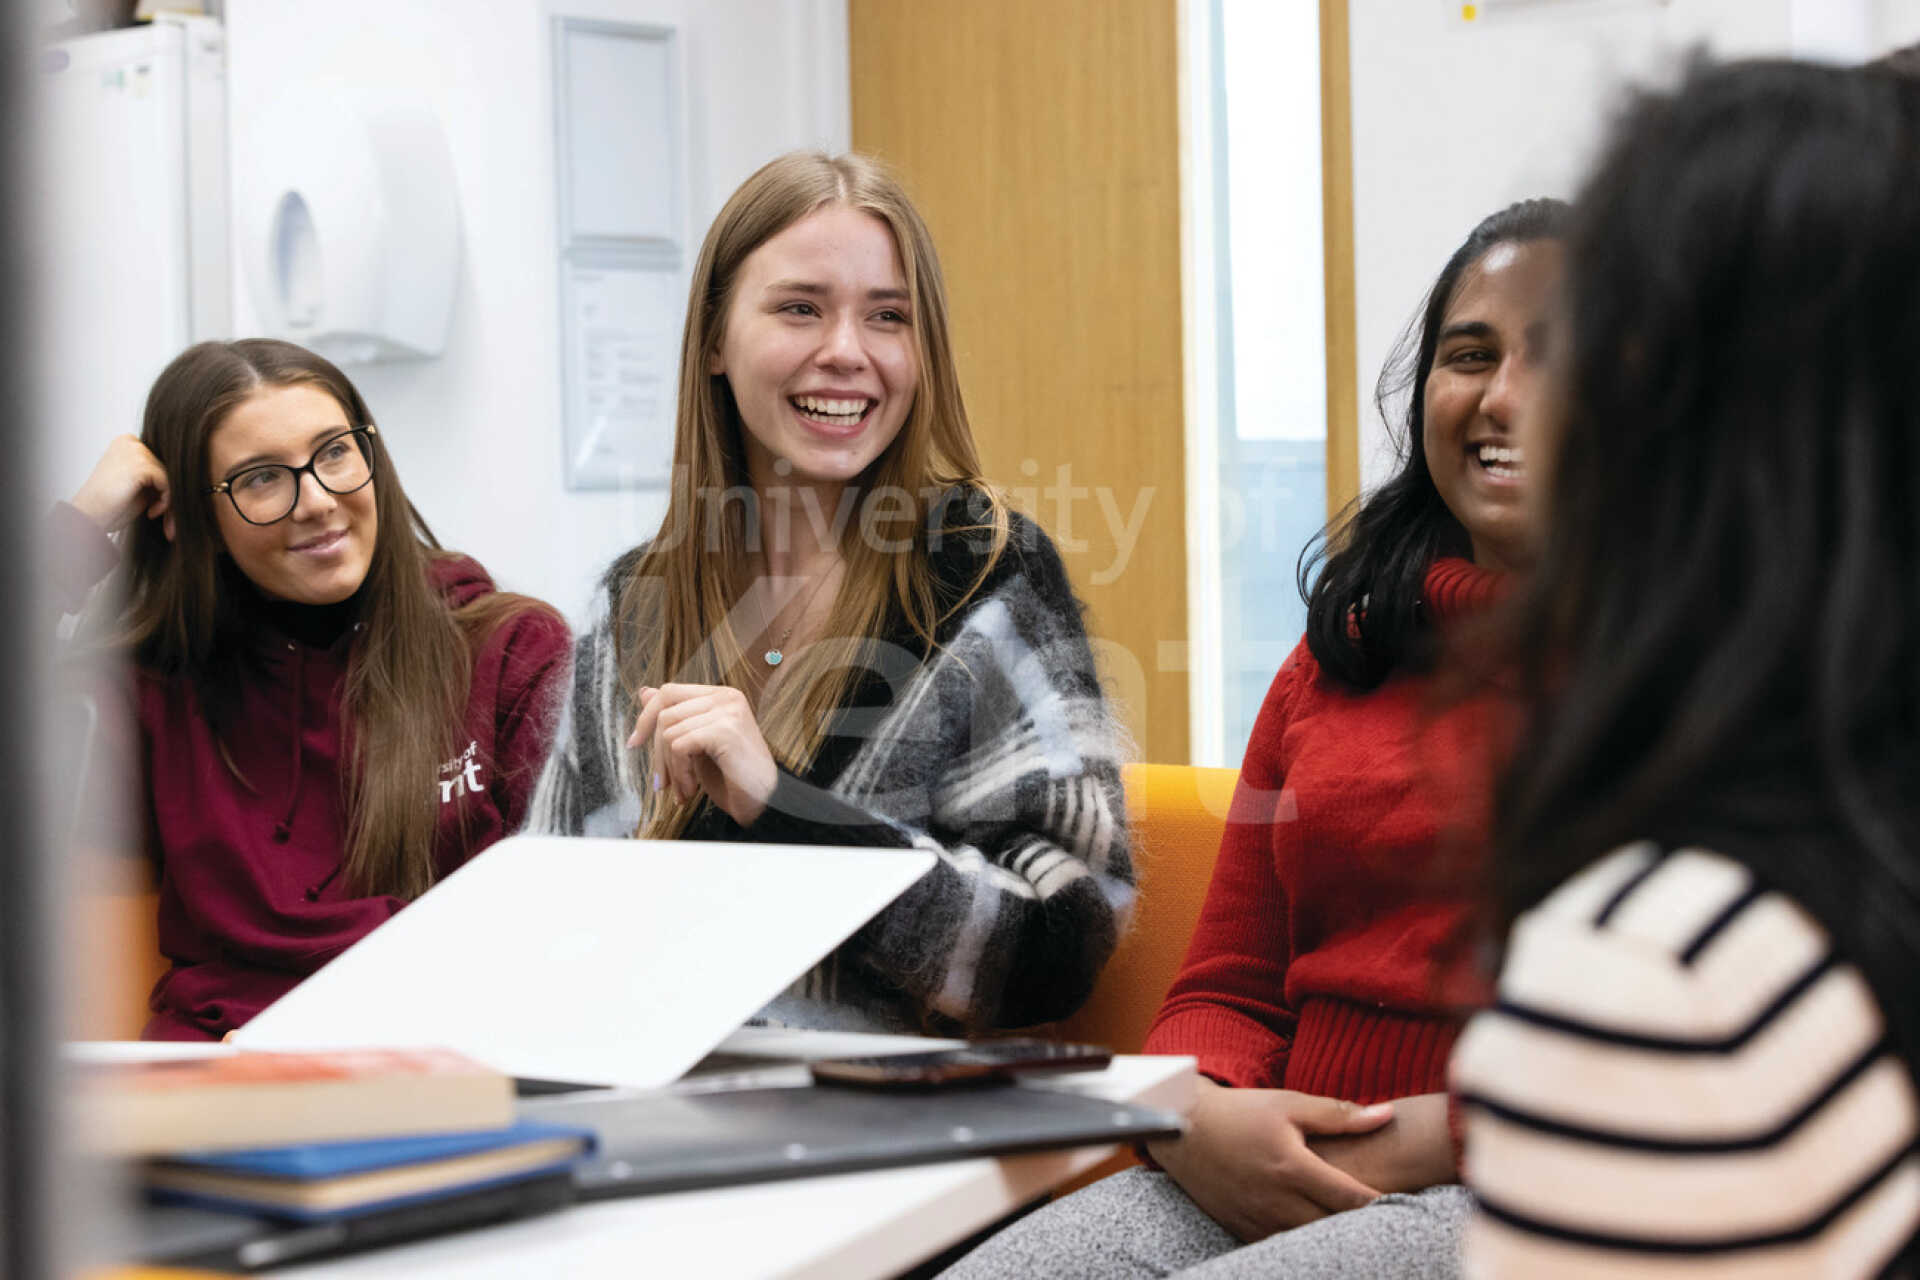 Students laughing